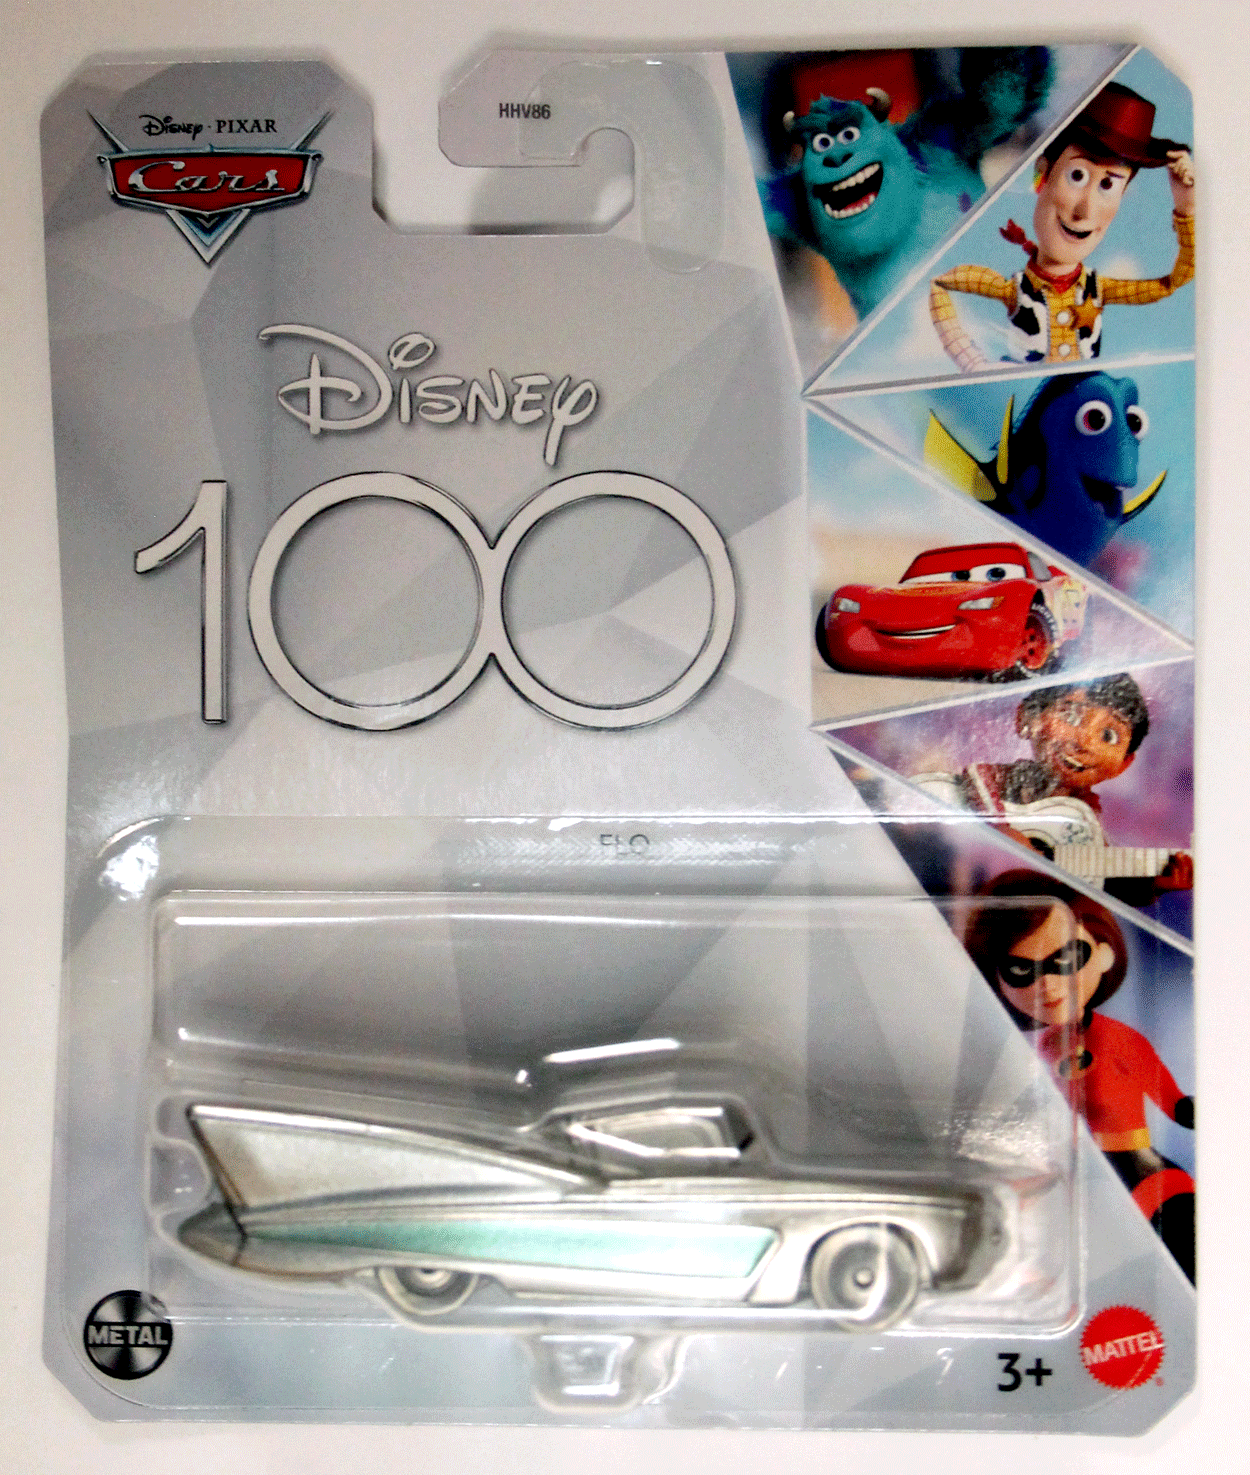 COMING SOON - Disney Pixar Cars 2023 Character Cars (Mix 9) 1:55 Scale  Diecast Vehicles